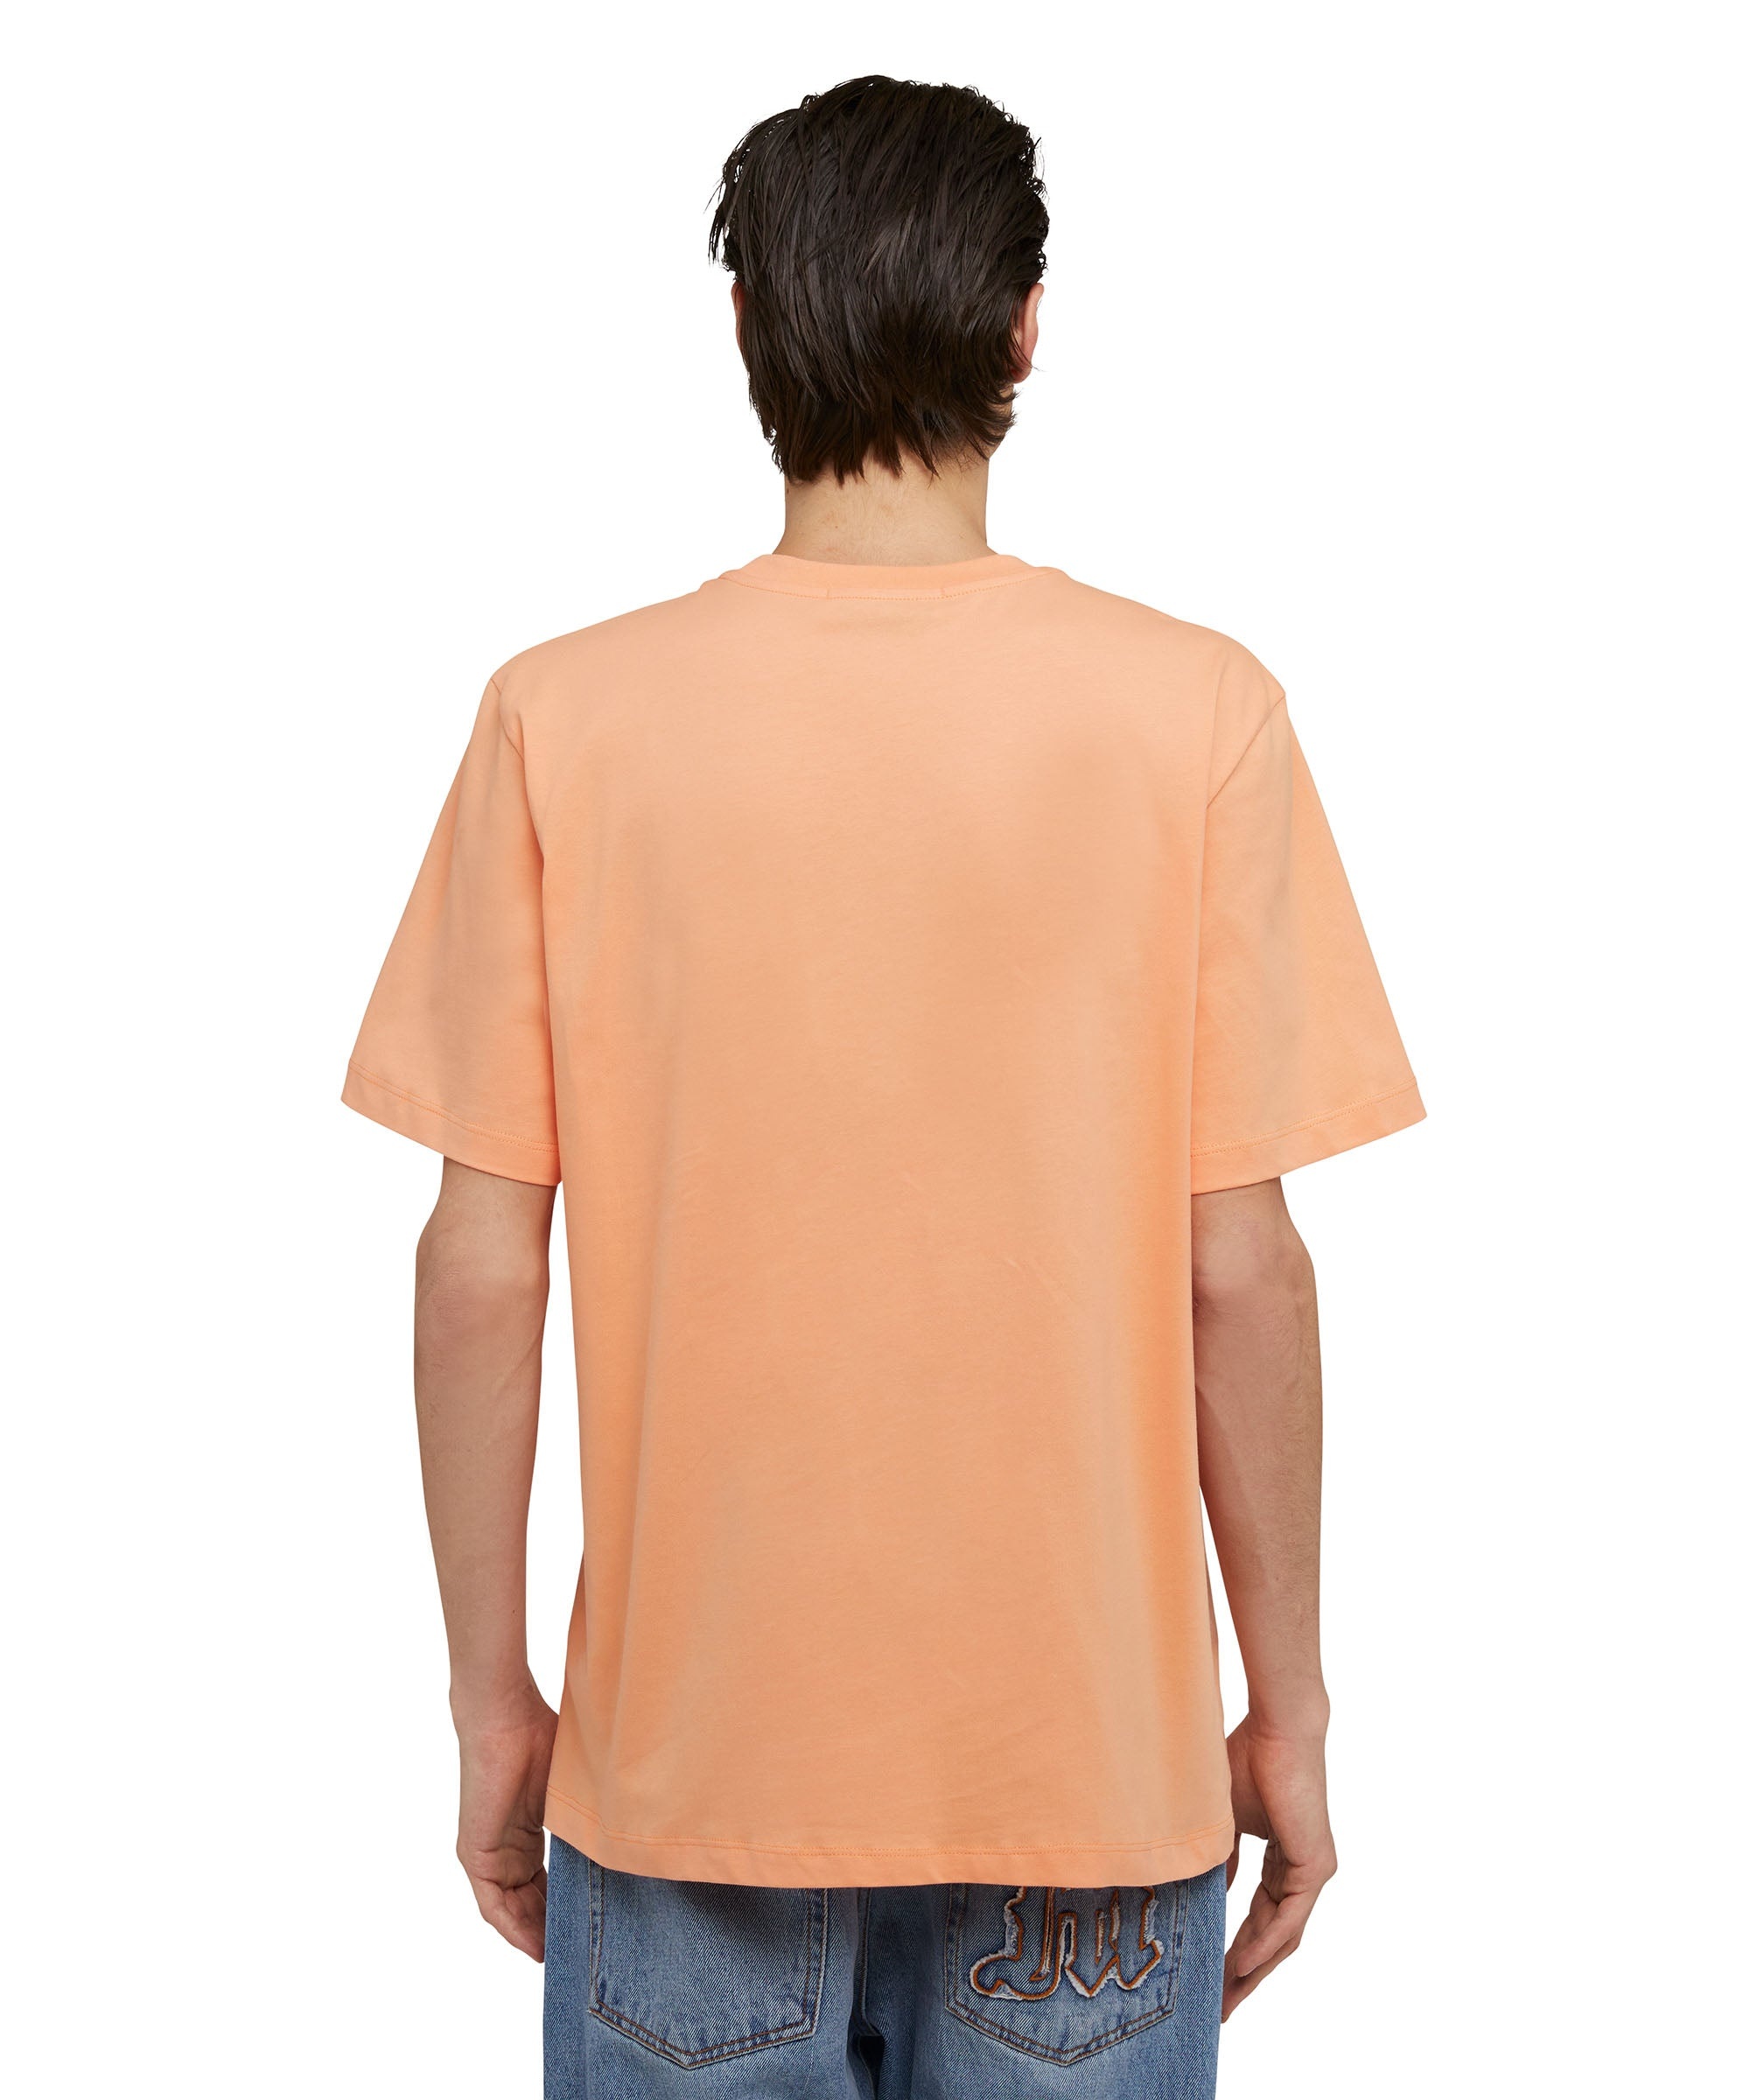 Cotton crewneck t-shirt with brushed MSGM logo at the neckline - 4